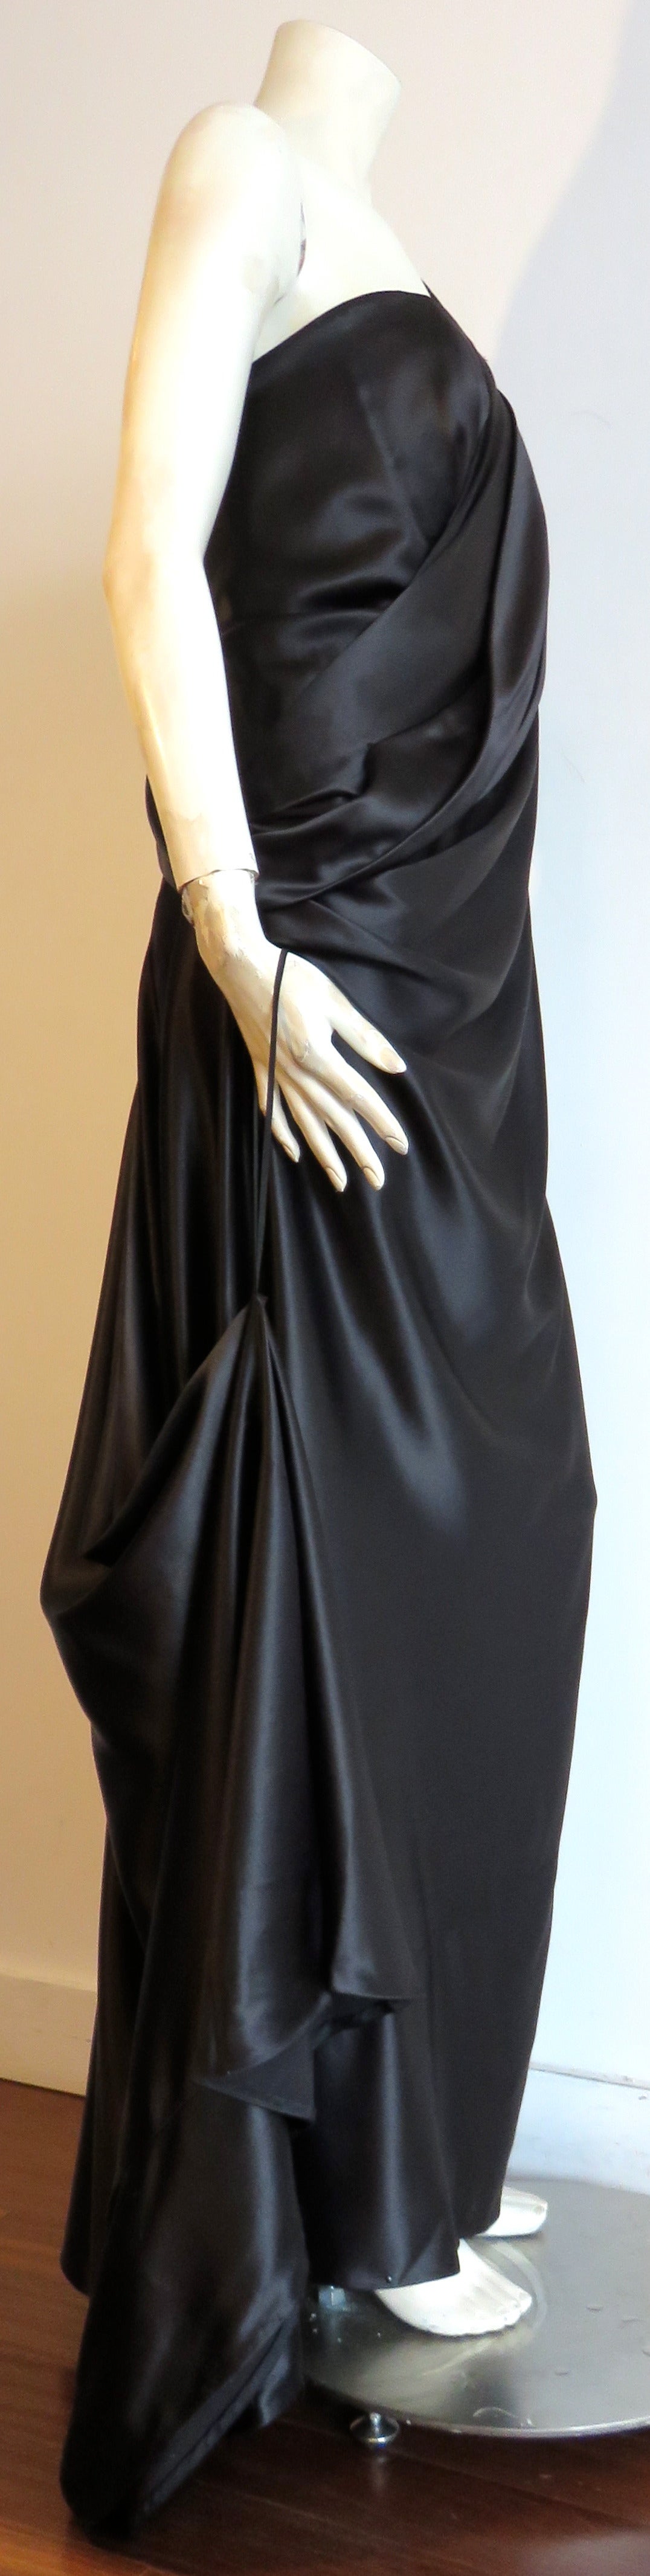 MARC JACOBS Silk charmeuse evening gown dress For Sale 4